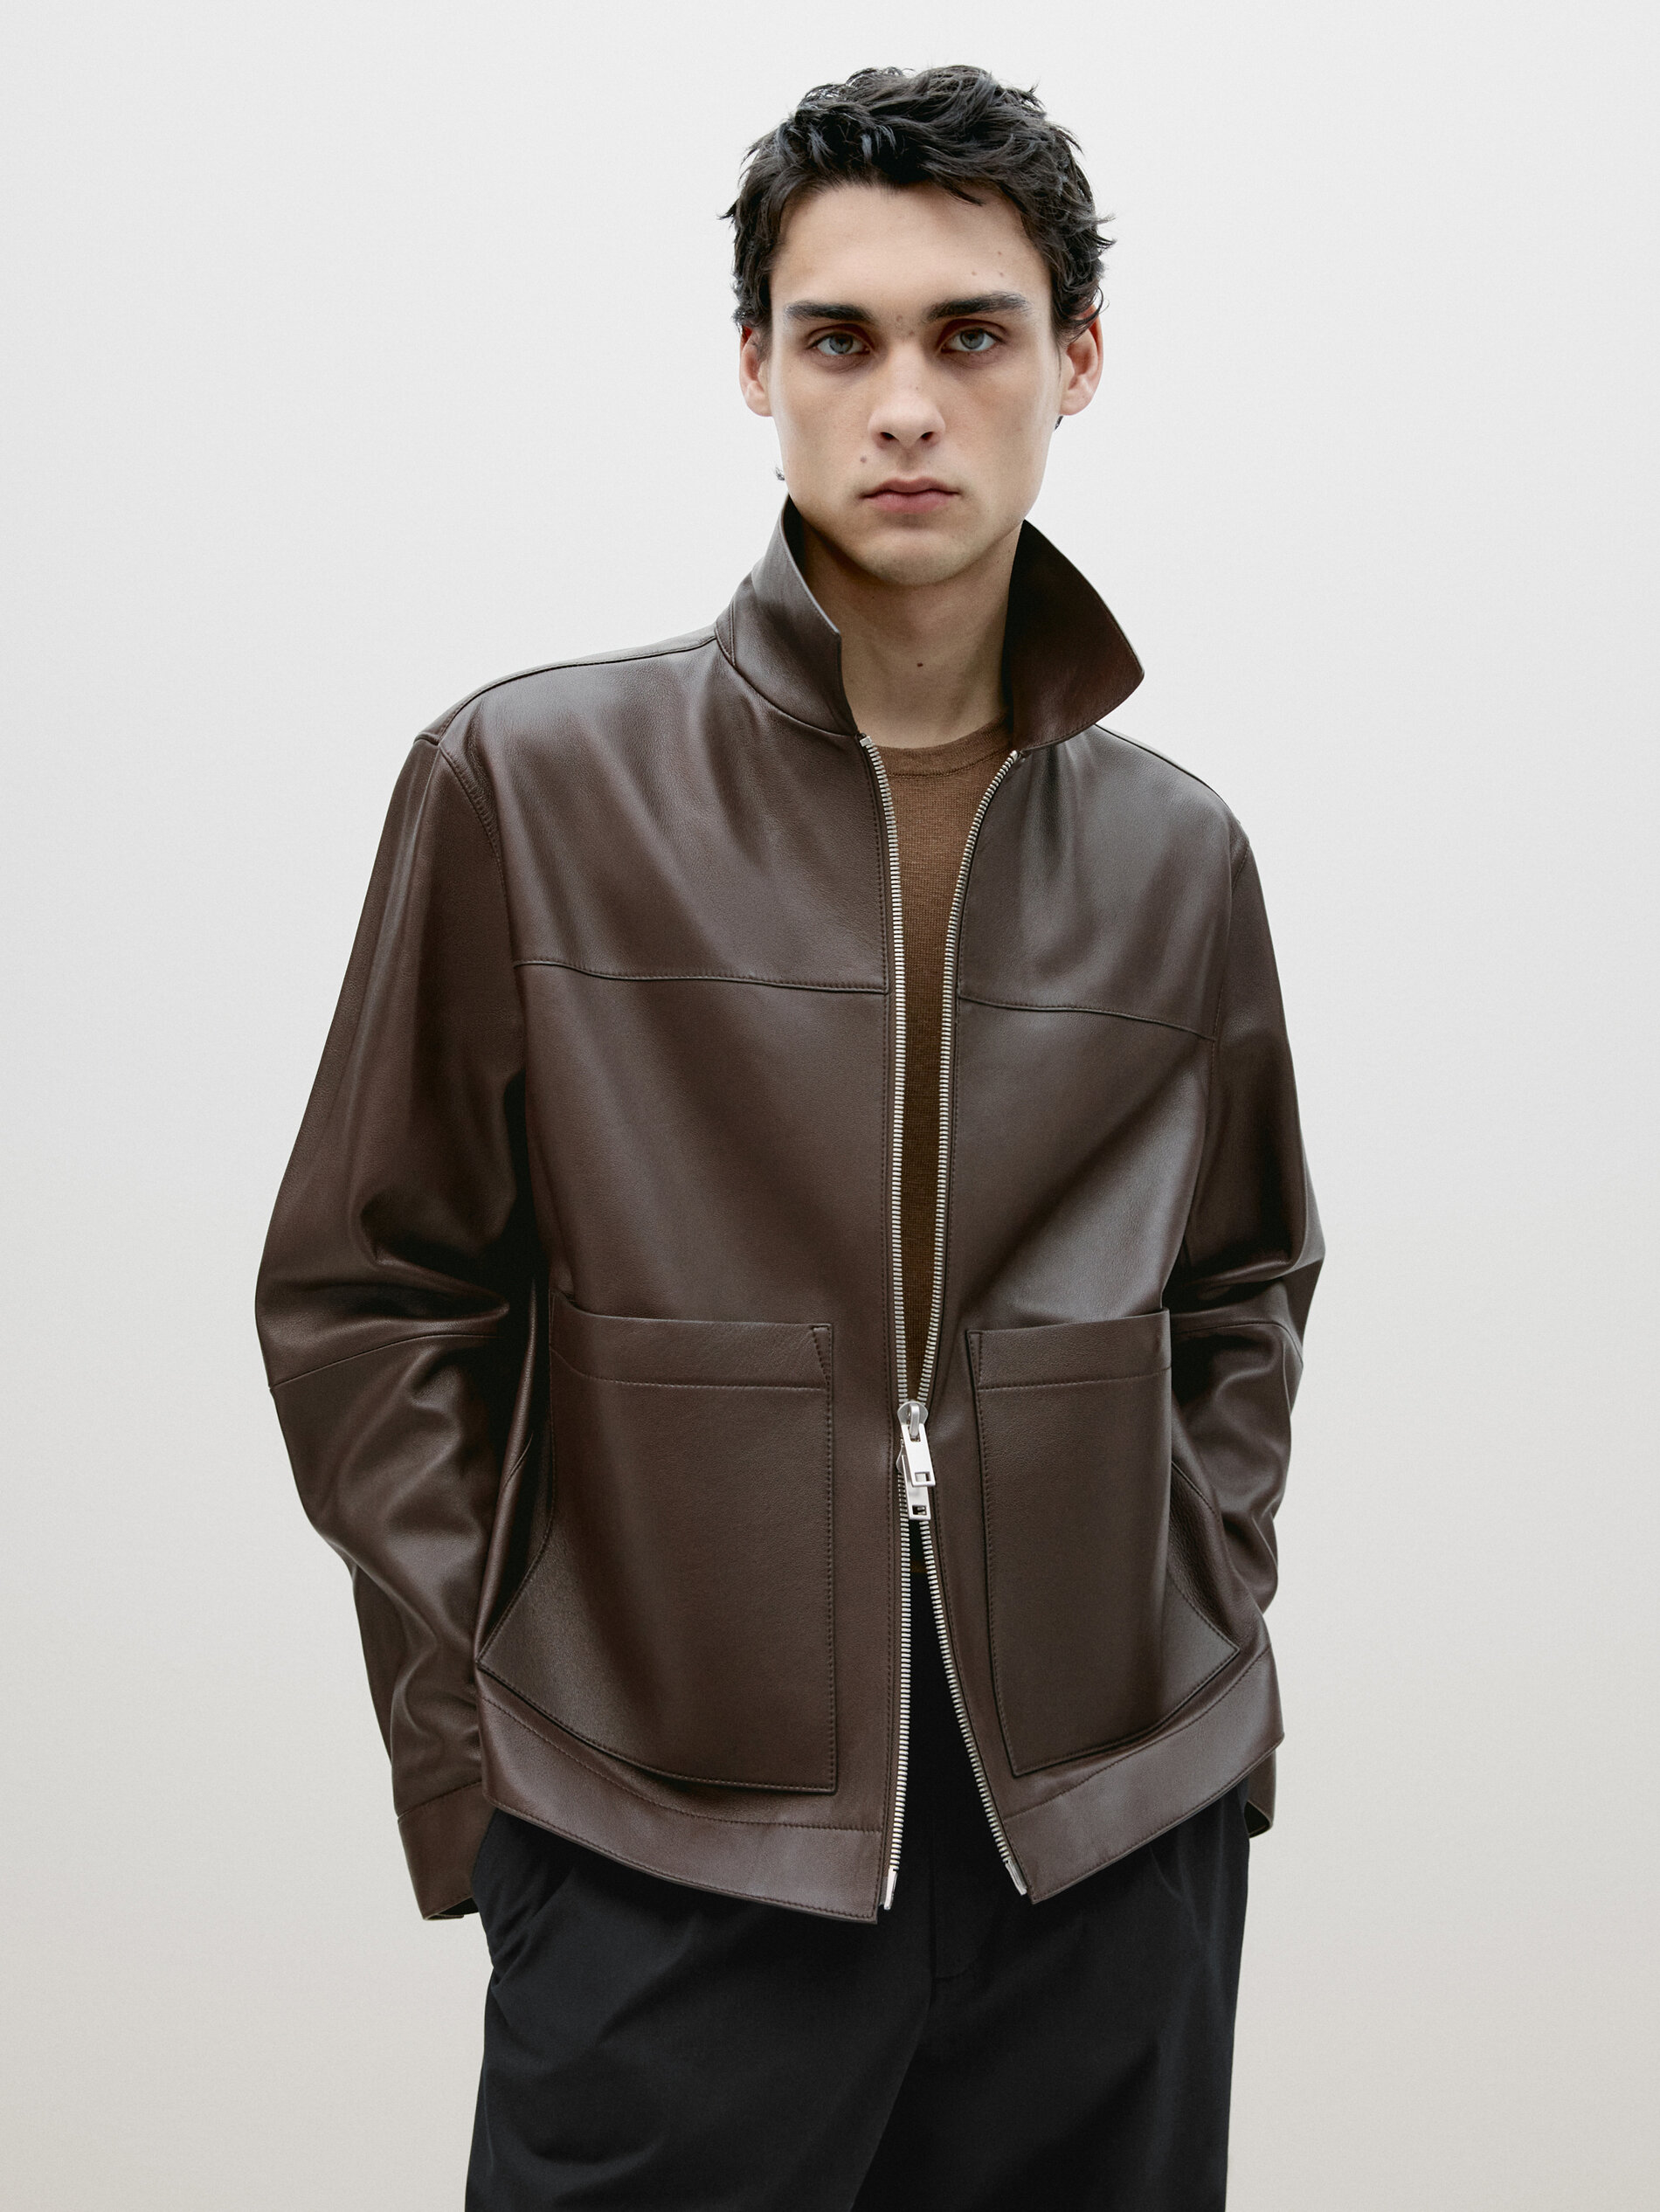 Nappa leather jacket with pockets - Limited Edition